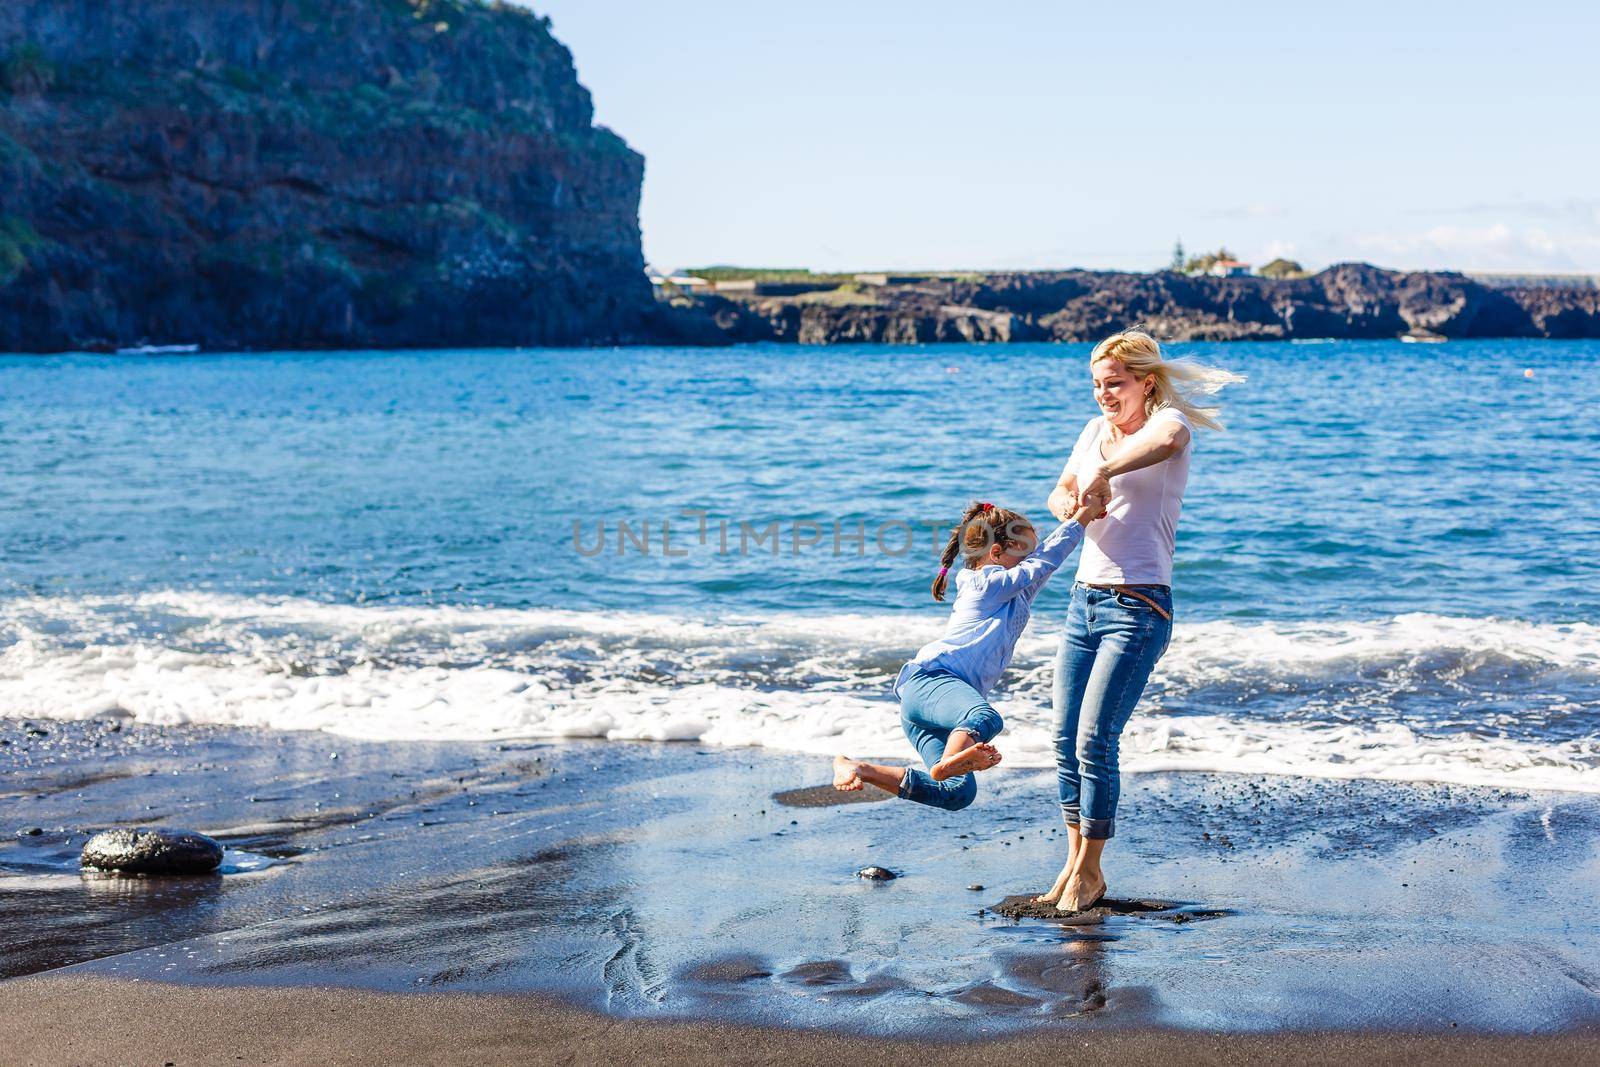 Family holiday on Tenerife, Spain. Mother with daughter outdoors on ocean. Portrait travel tourists - mom with daughter. Positive human emotions, active lifestyles. Happy young family on sea beach